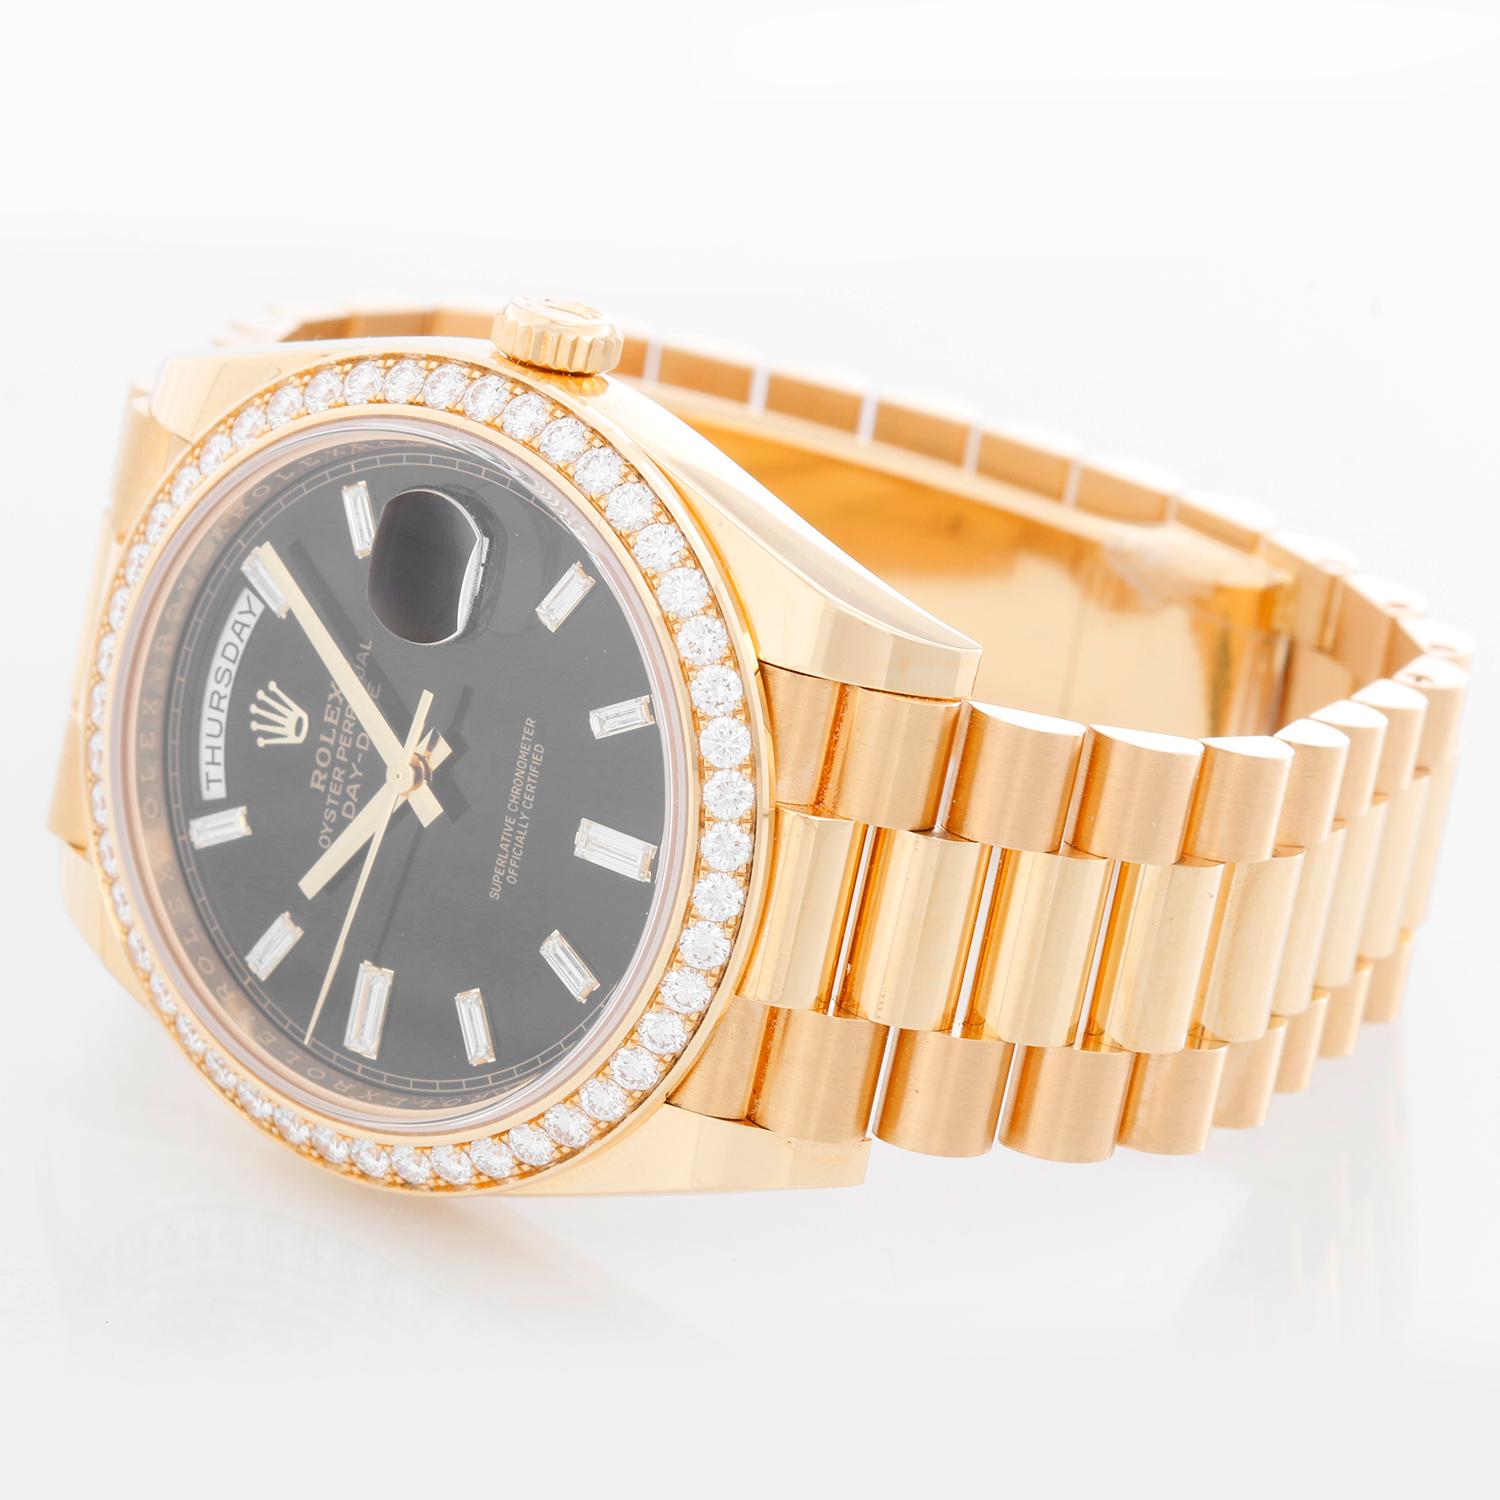 Rolex Day-Date II President 18k Yellow Gold Men's 40mm Watch 2282348 RBR - Automatic winding, 31 jewels, sapphire crystal, with day and date. 18K Yellow gold; diamond bezel  (40mm diameter). Black dial with baguette hour markers.. 18k yellow gold